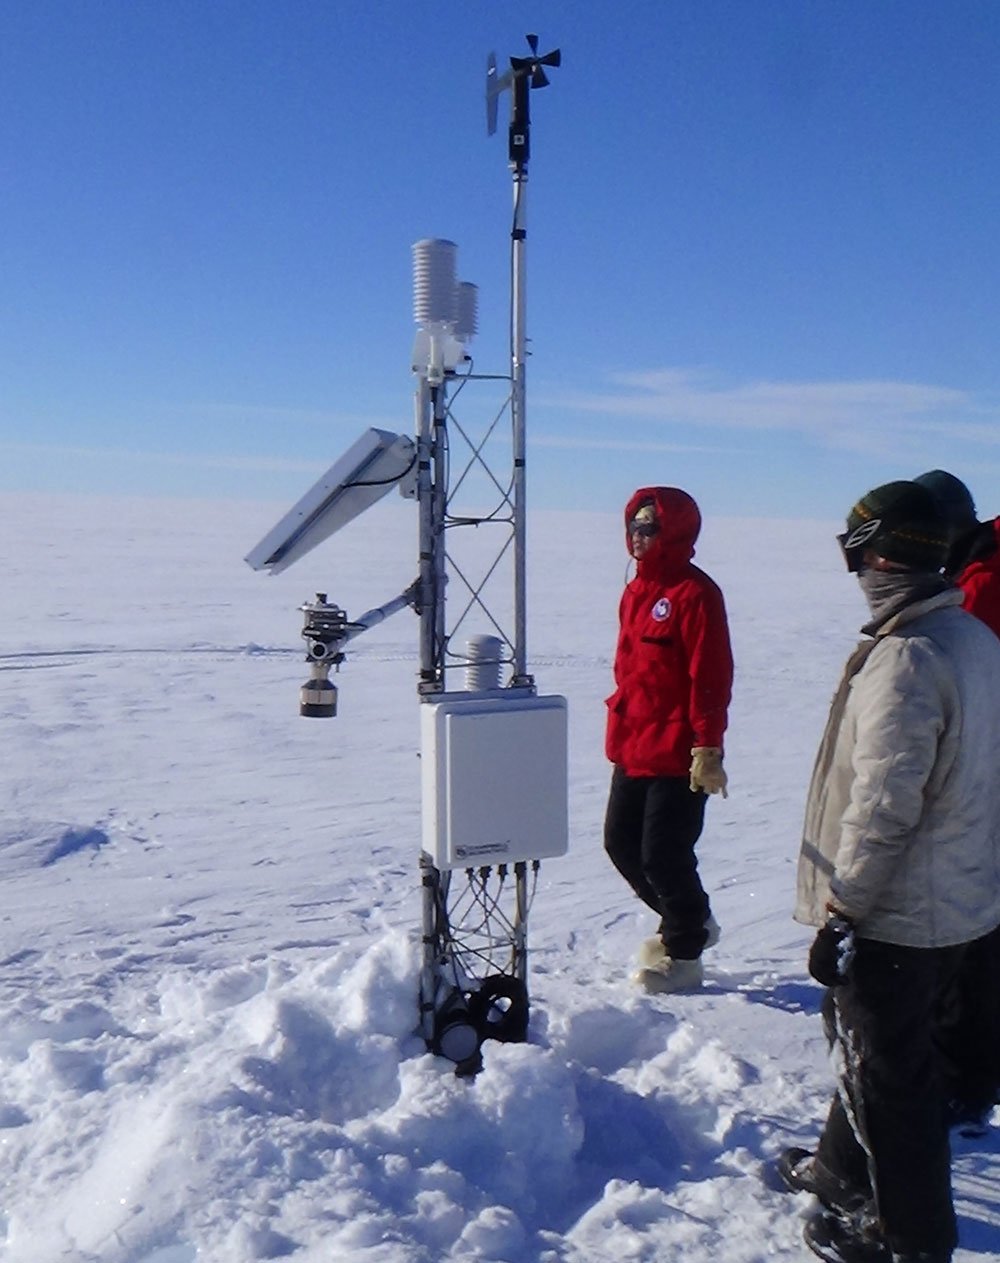 Two people in heavy coats and gear look at a tall sensor array they have just installed in snow